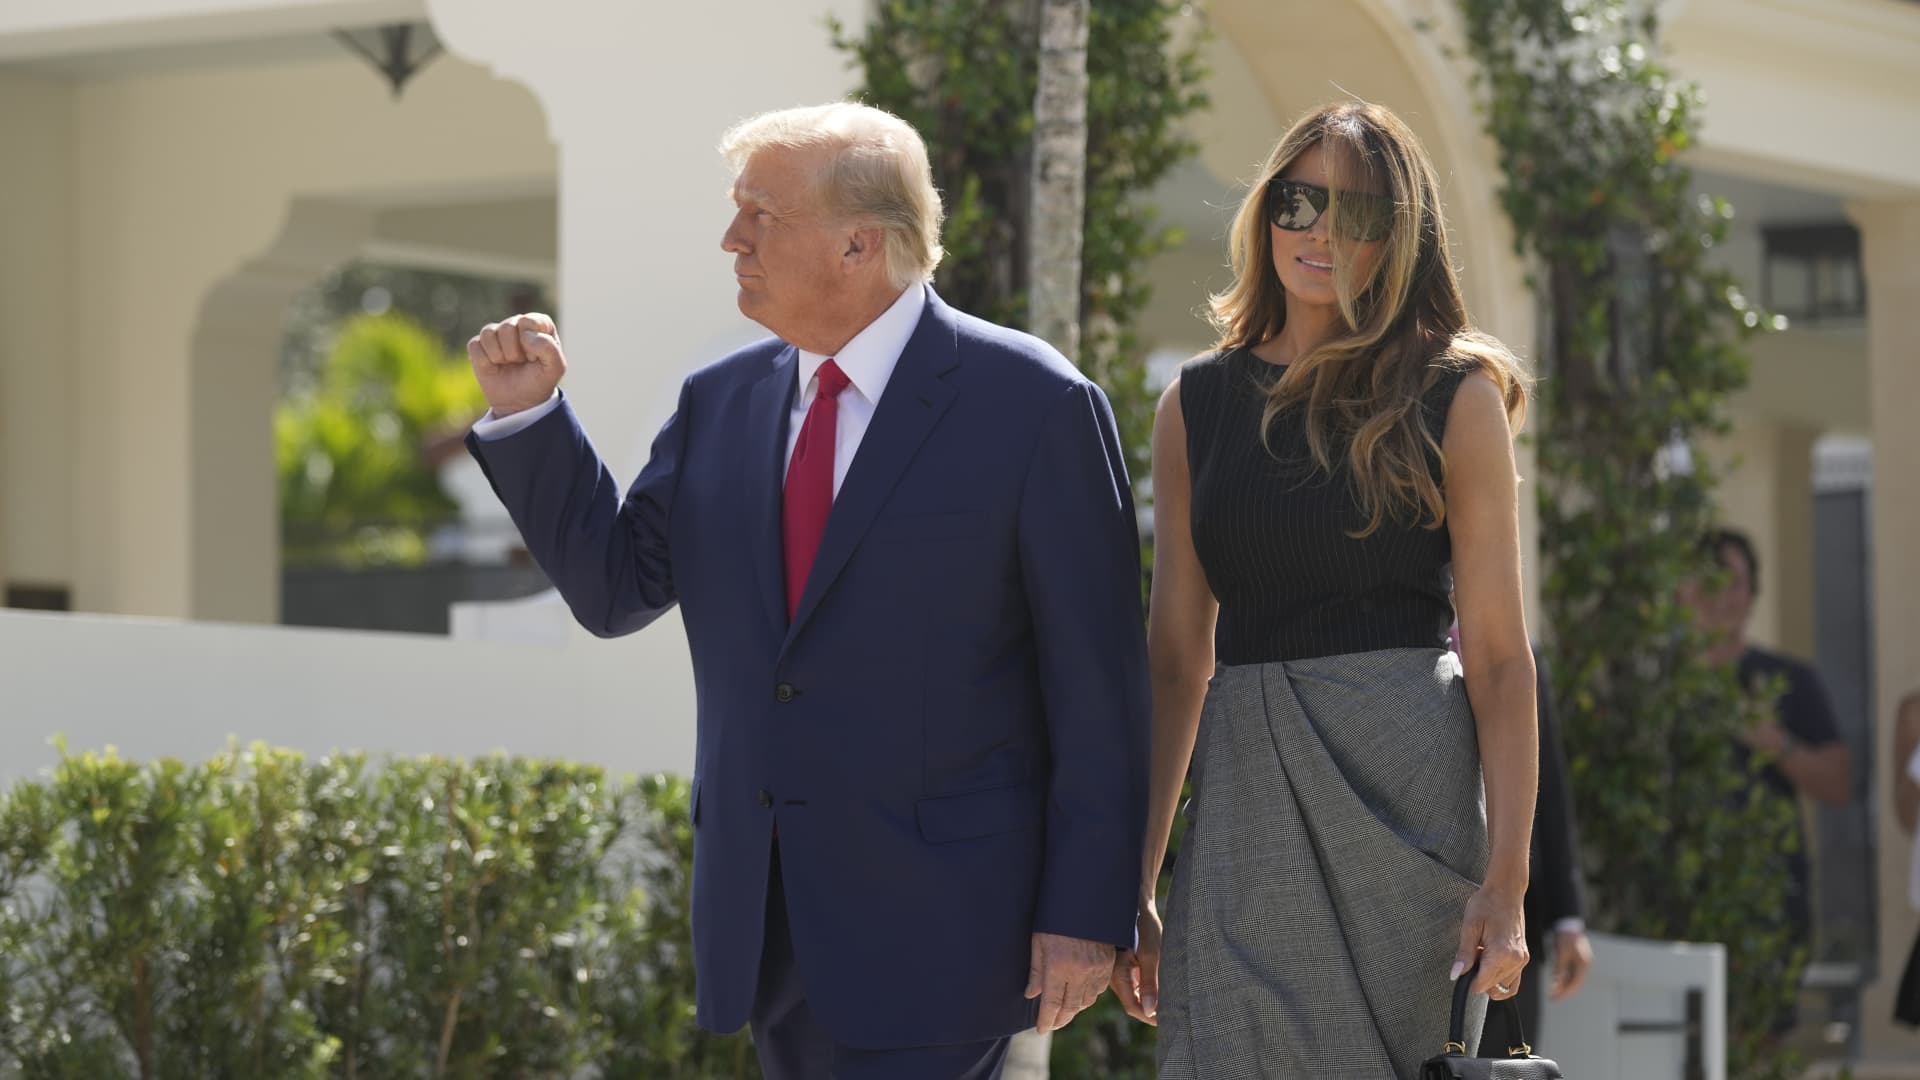 Former President Donald Trump walks out with Melania Trump, after voting at Morton and Barbara Mandel Recreation Center on Election Day, Tuesday, Nov. 8, 2022, in Palm Beach, Fla.